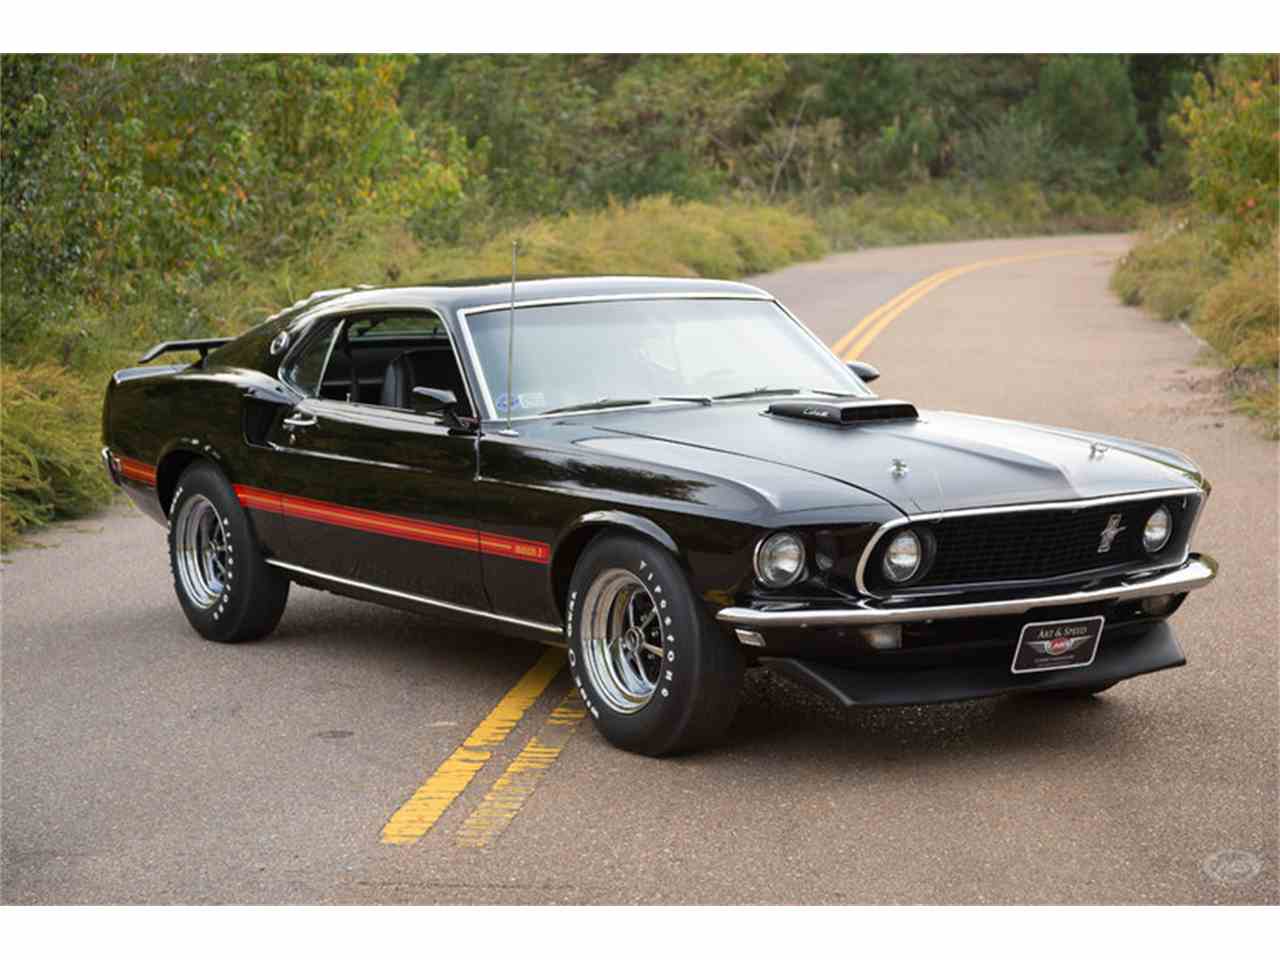 1969 Ford Mustang 428 Super Cobra Jet Ram Air for Sale | ClassicCars ...